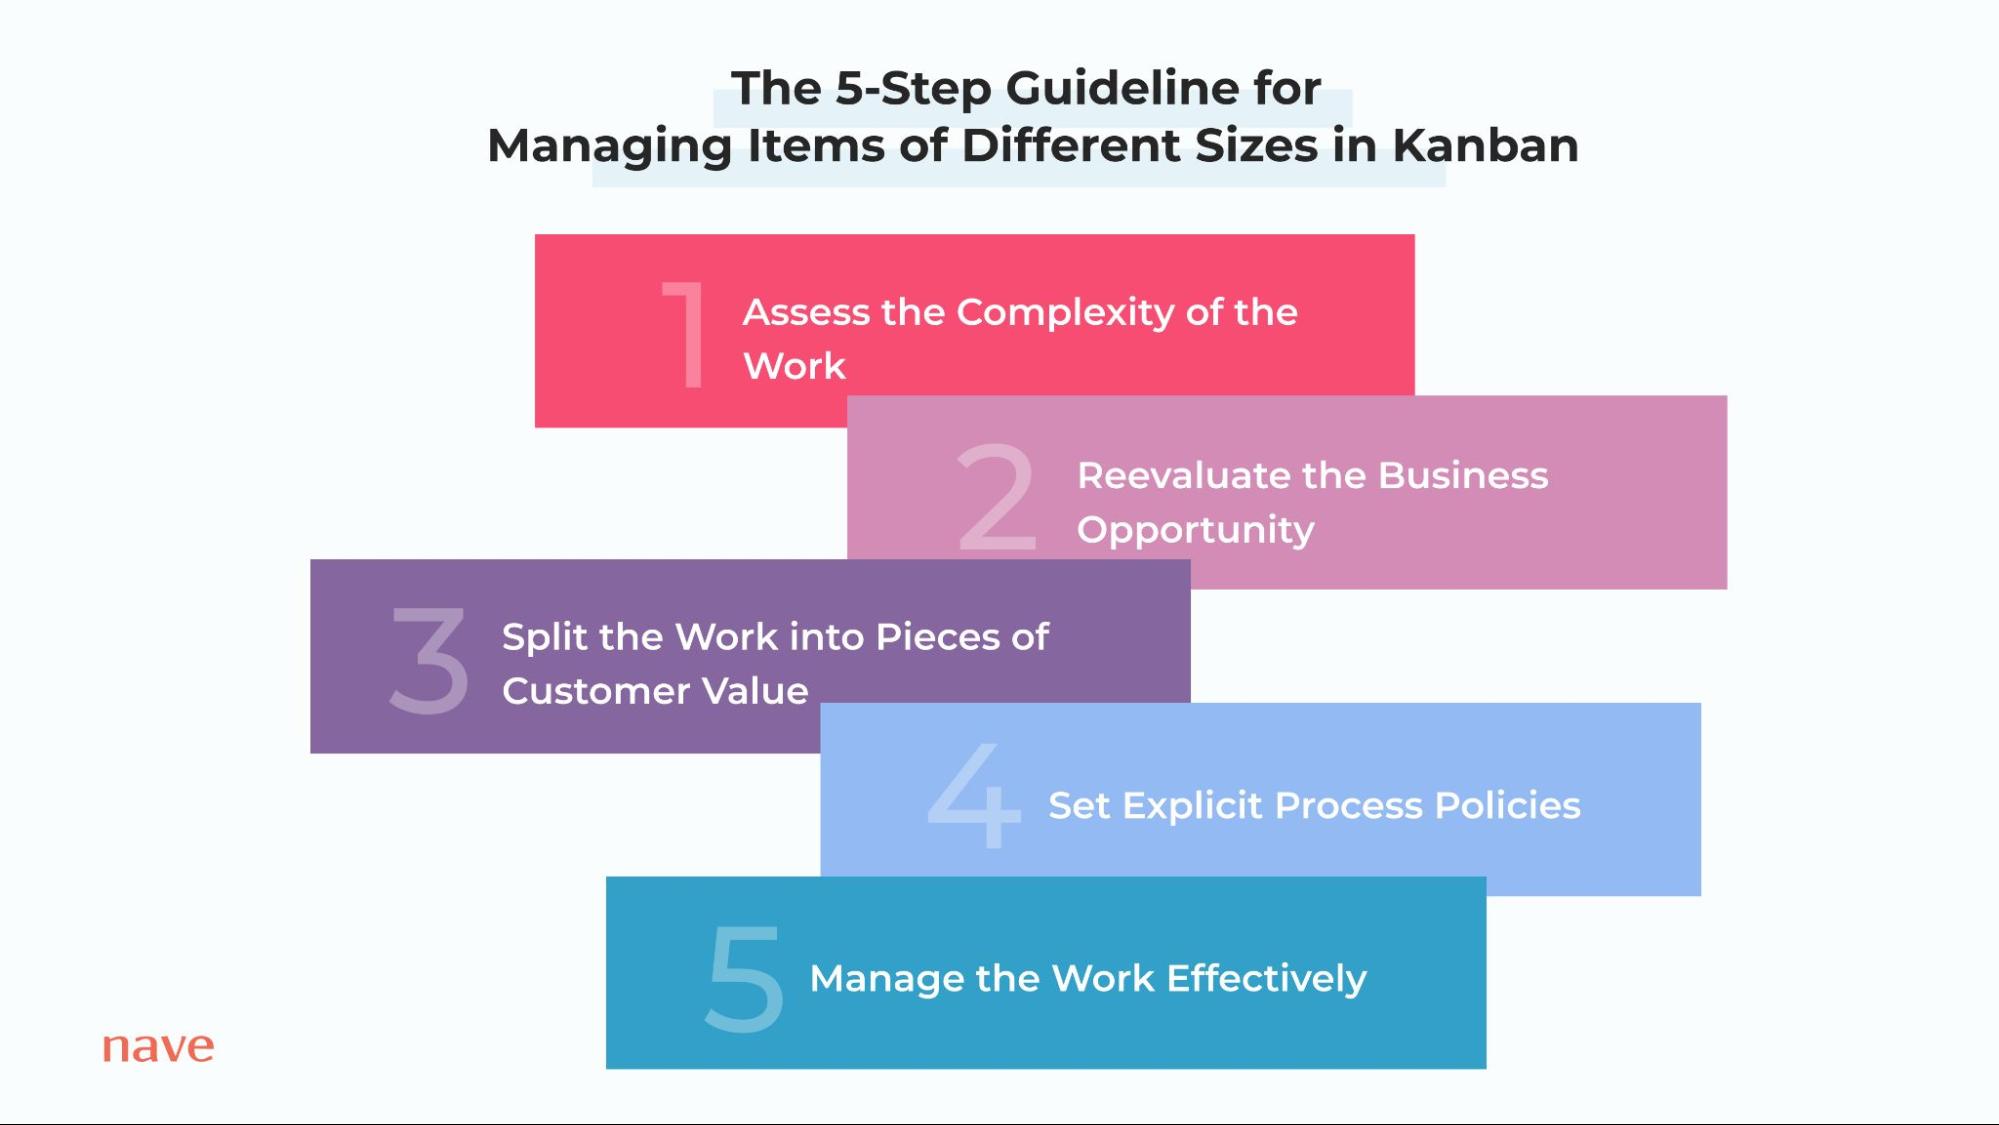 The 5-step guideline for managing items of different sizes in Kanban